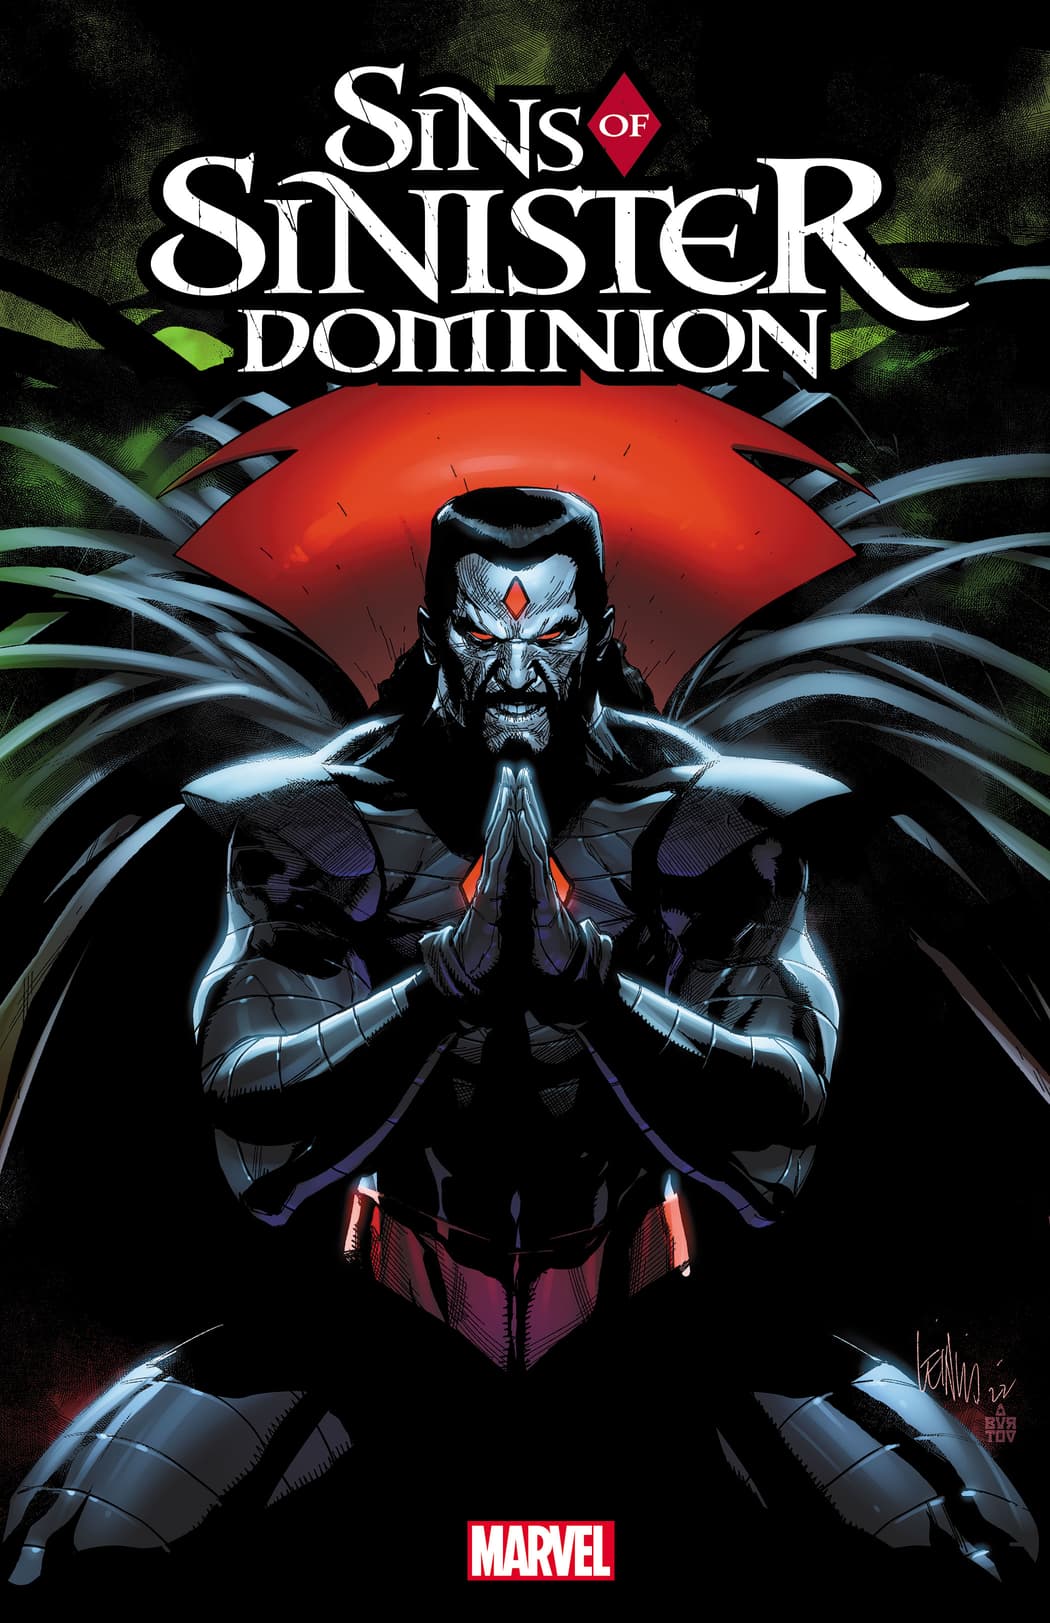 SINS OF SINISTER: DOMINION #1 cover by Leinil Francis Yu